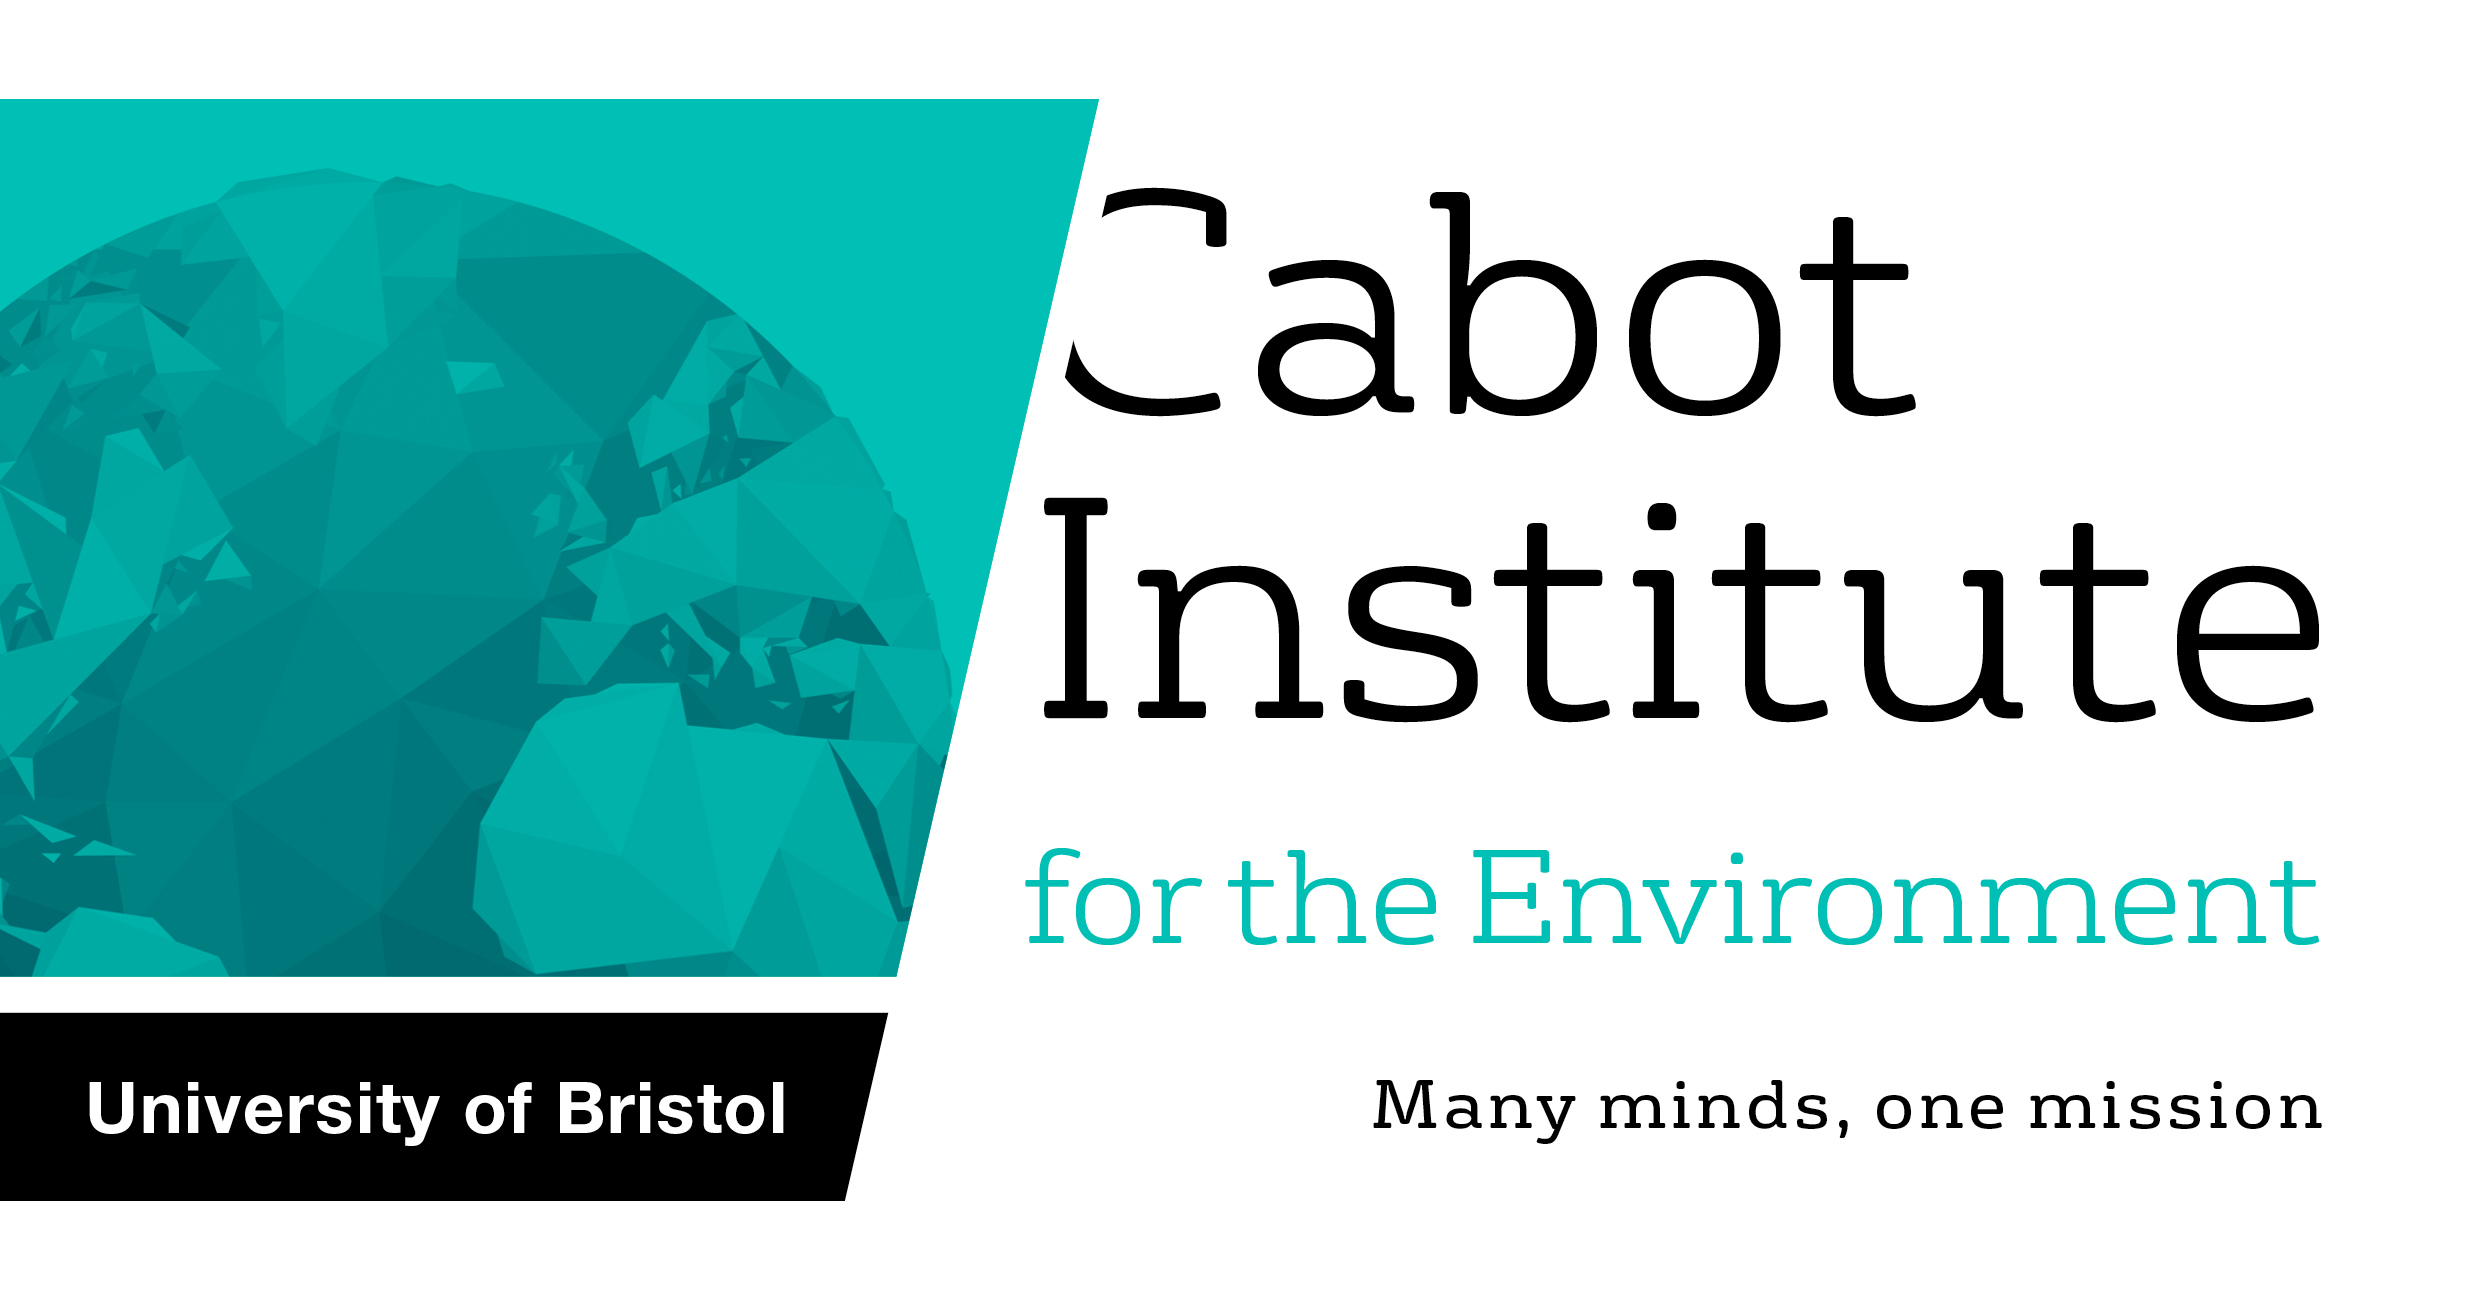 Cabot Institute for the environment: Many minds, one mission